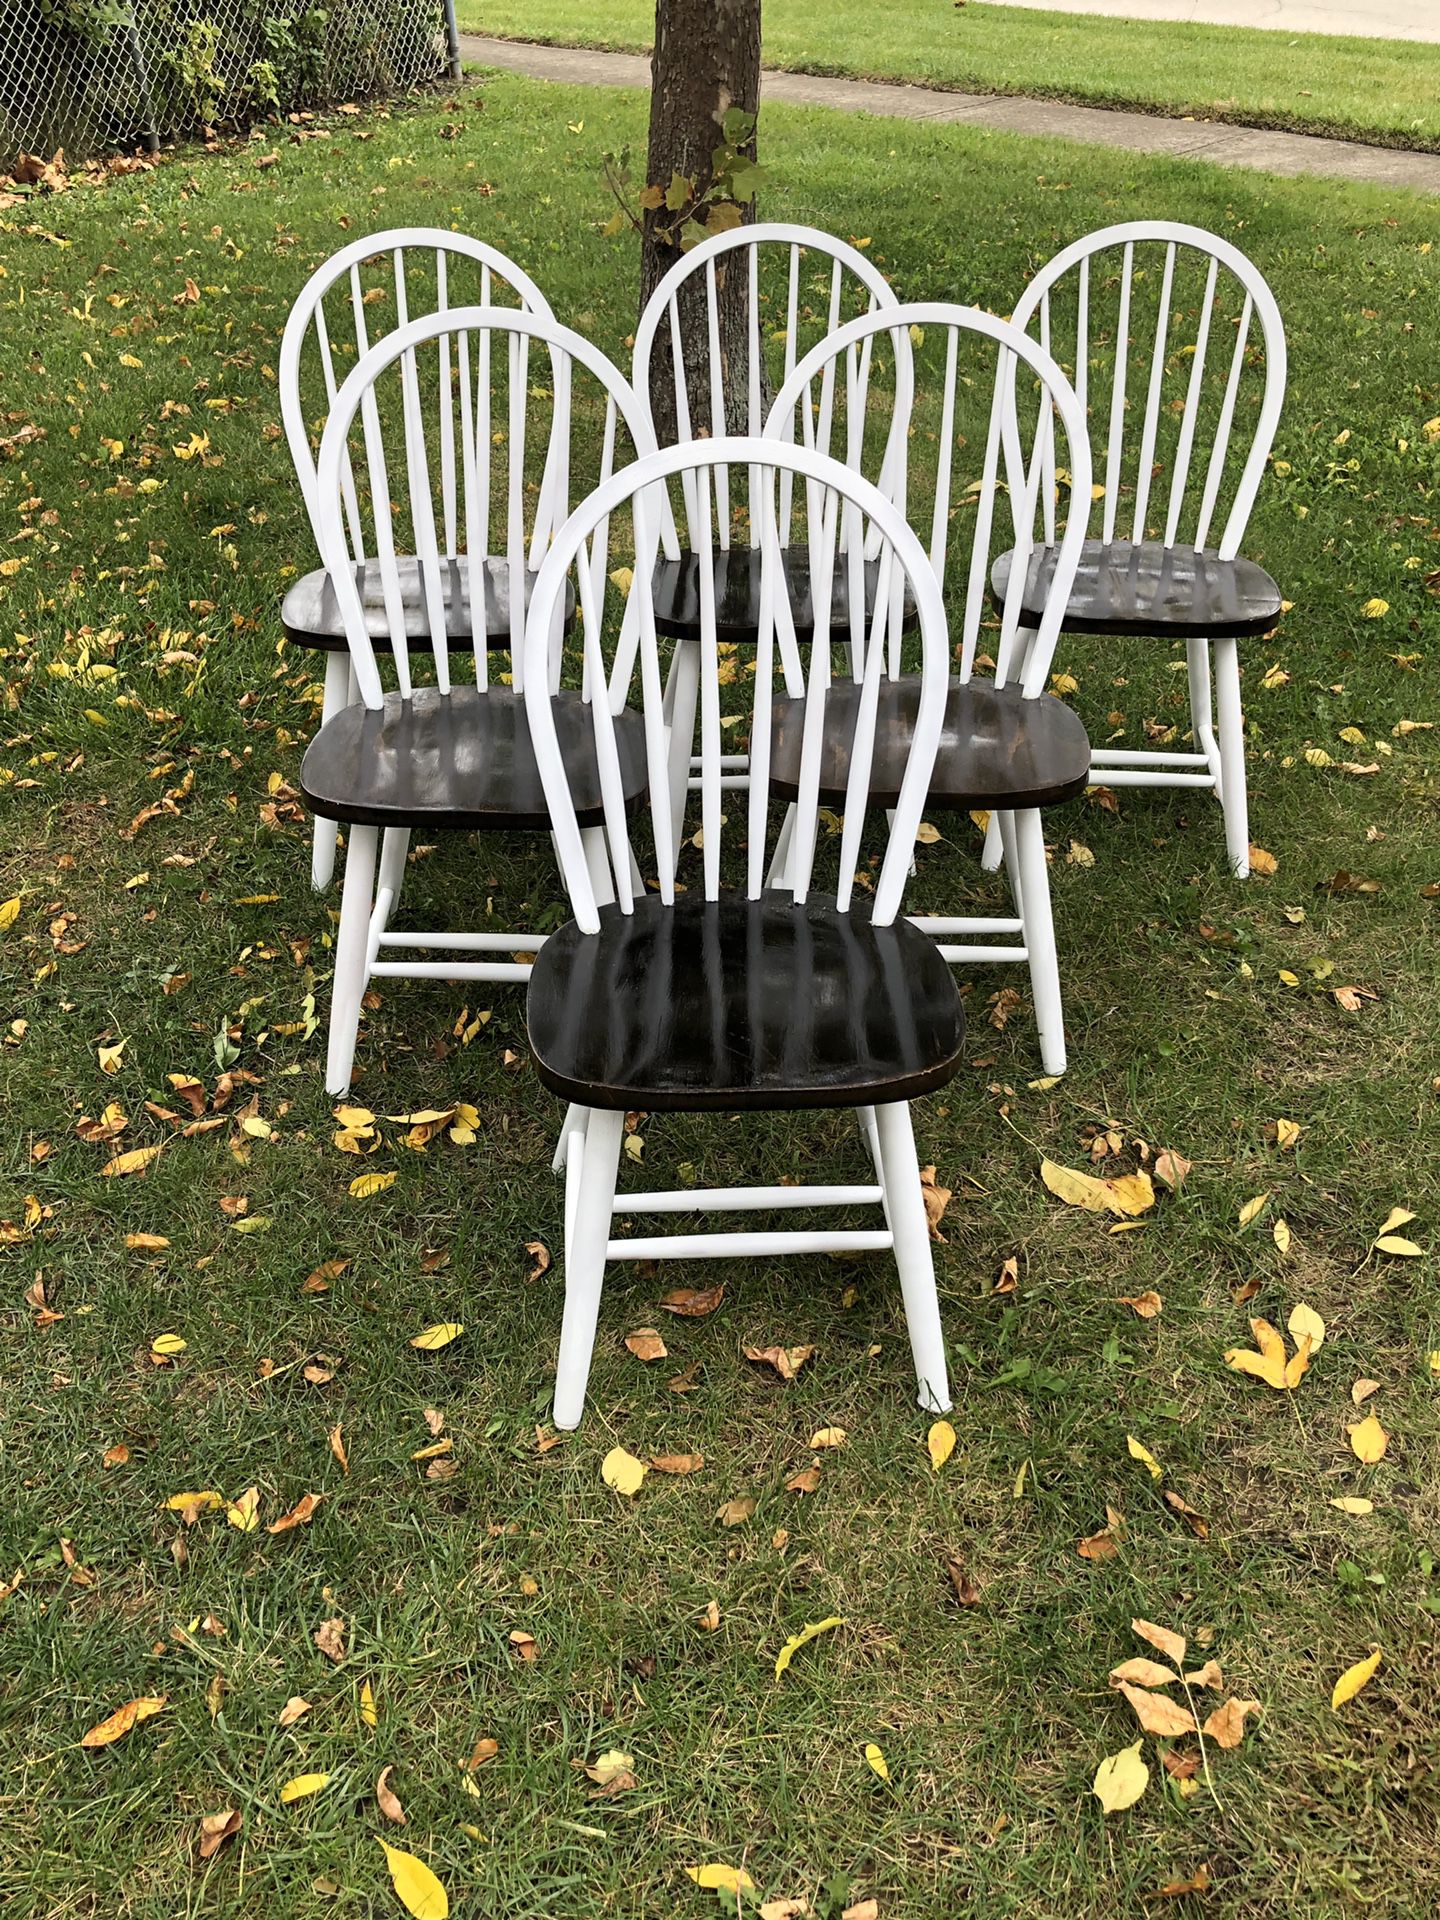 6 Wooden Rustic/Farmhouse Chairs!